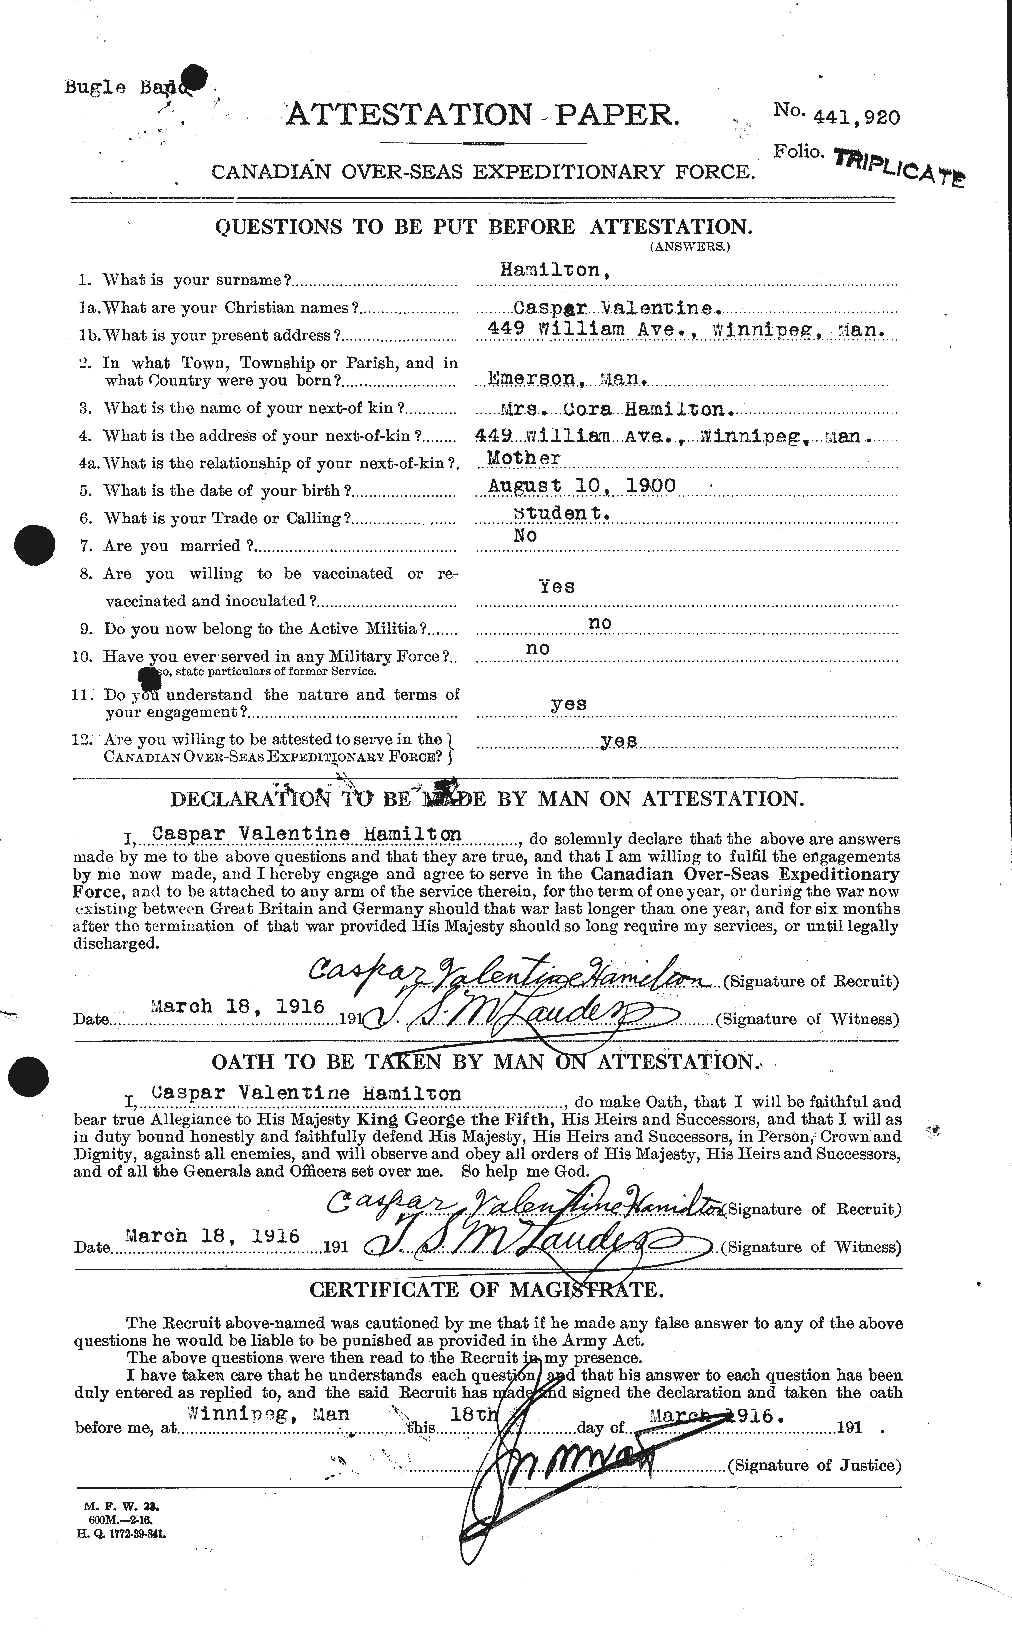 Personnel Records of the First World War - CEF 375284a